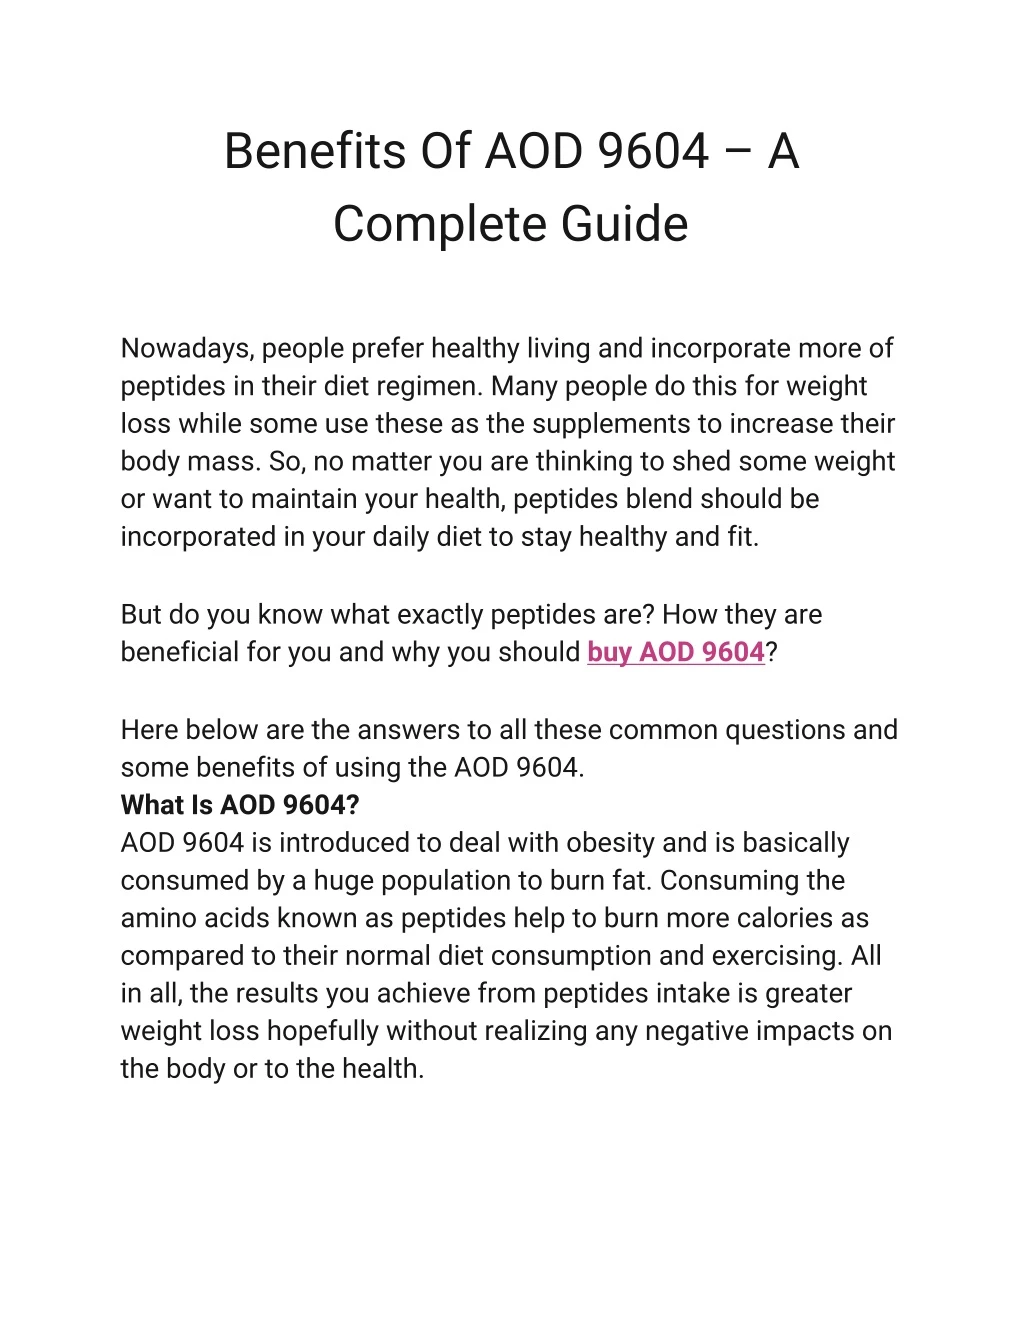 benefits of aod 9604 a complete guide